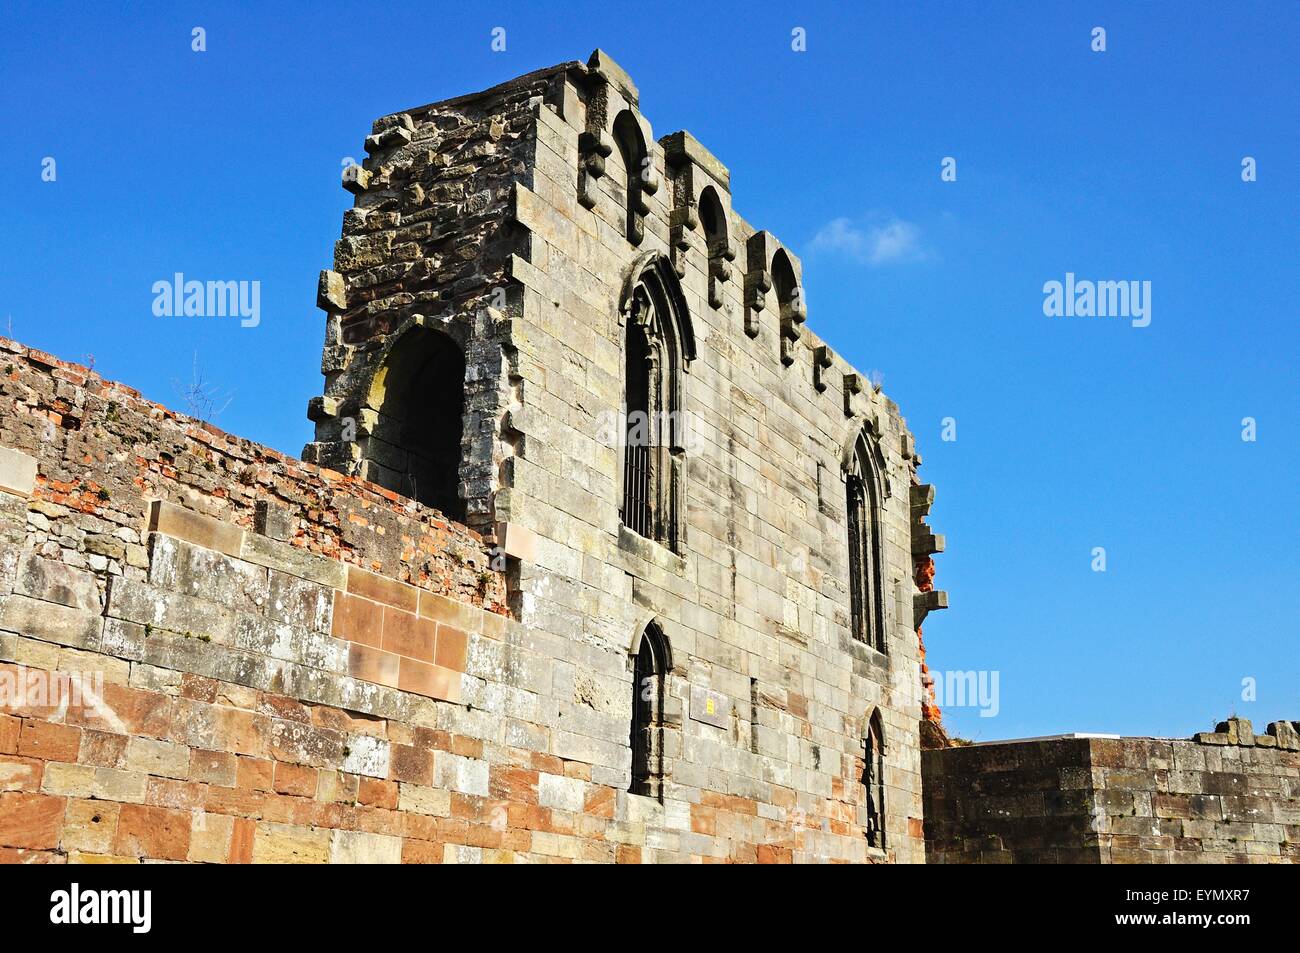 View of the Gothic Revival castle, Stafford, Staffordshire, England, UK, Western Europe. Stock Photo